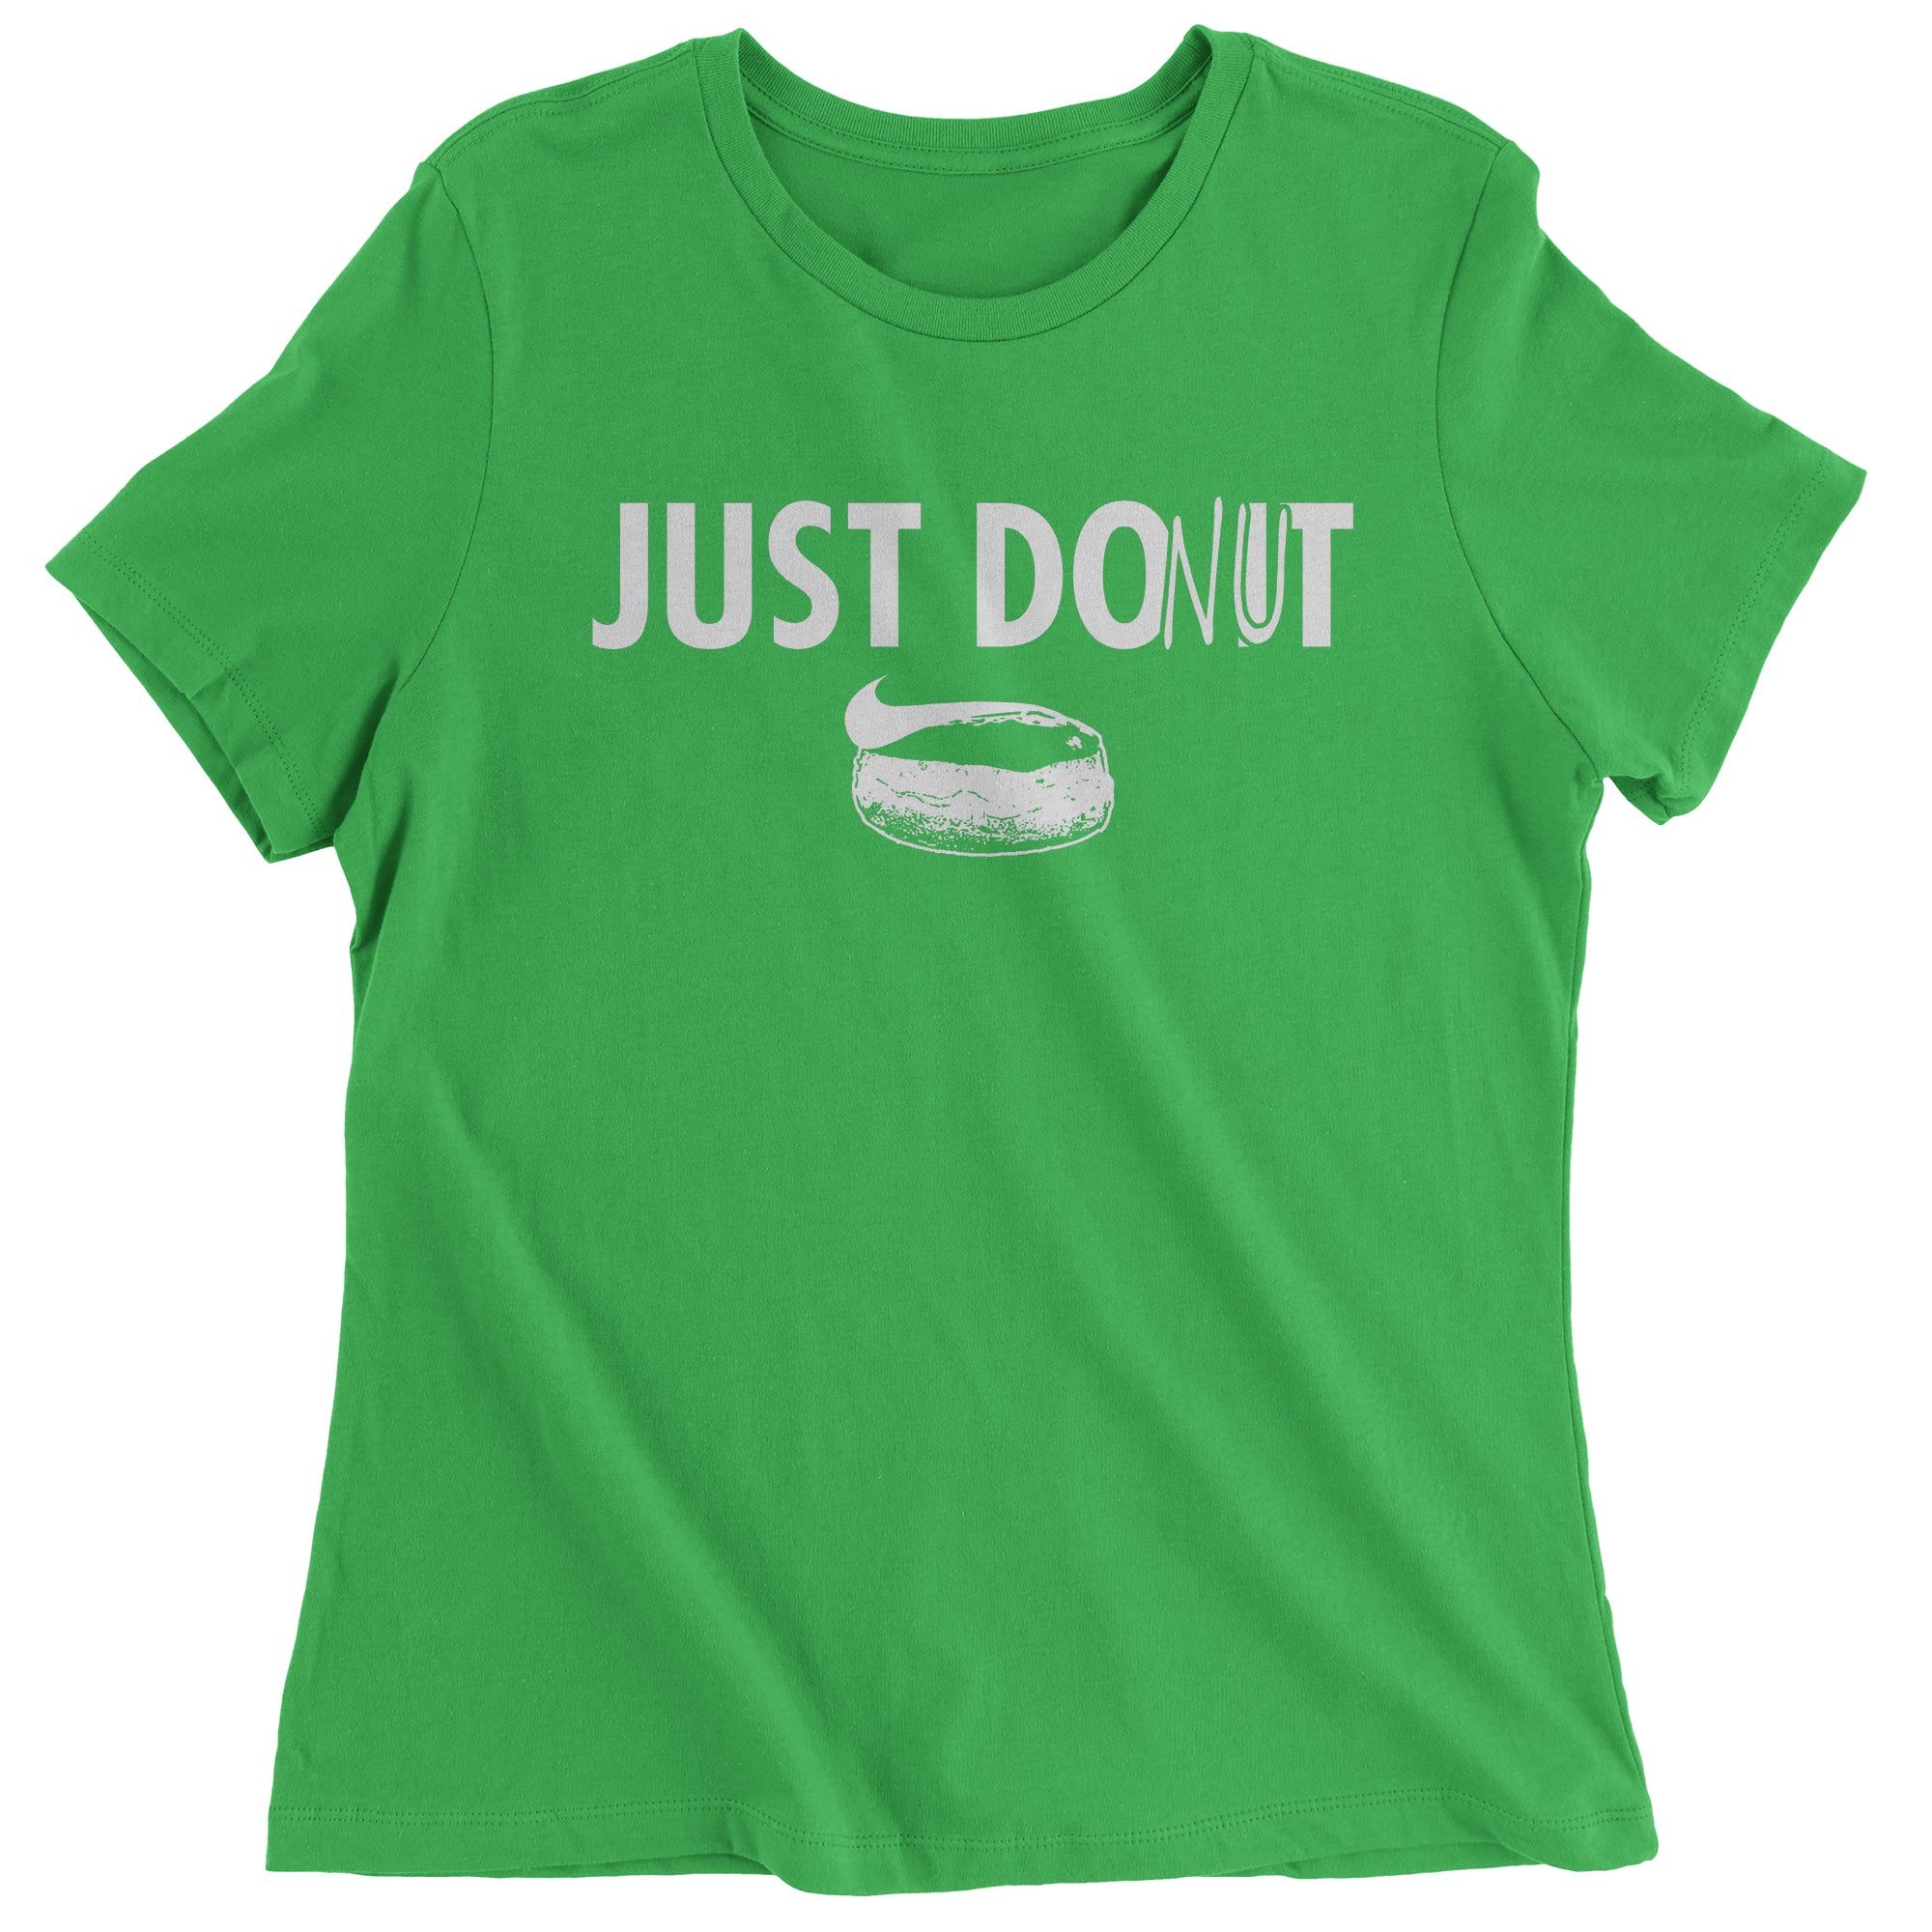 Just Donut Funny Parody Do It Later Women's T-Shirt